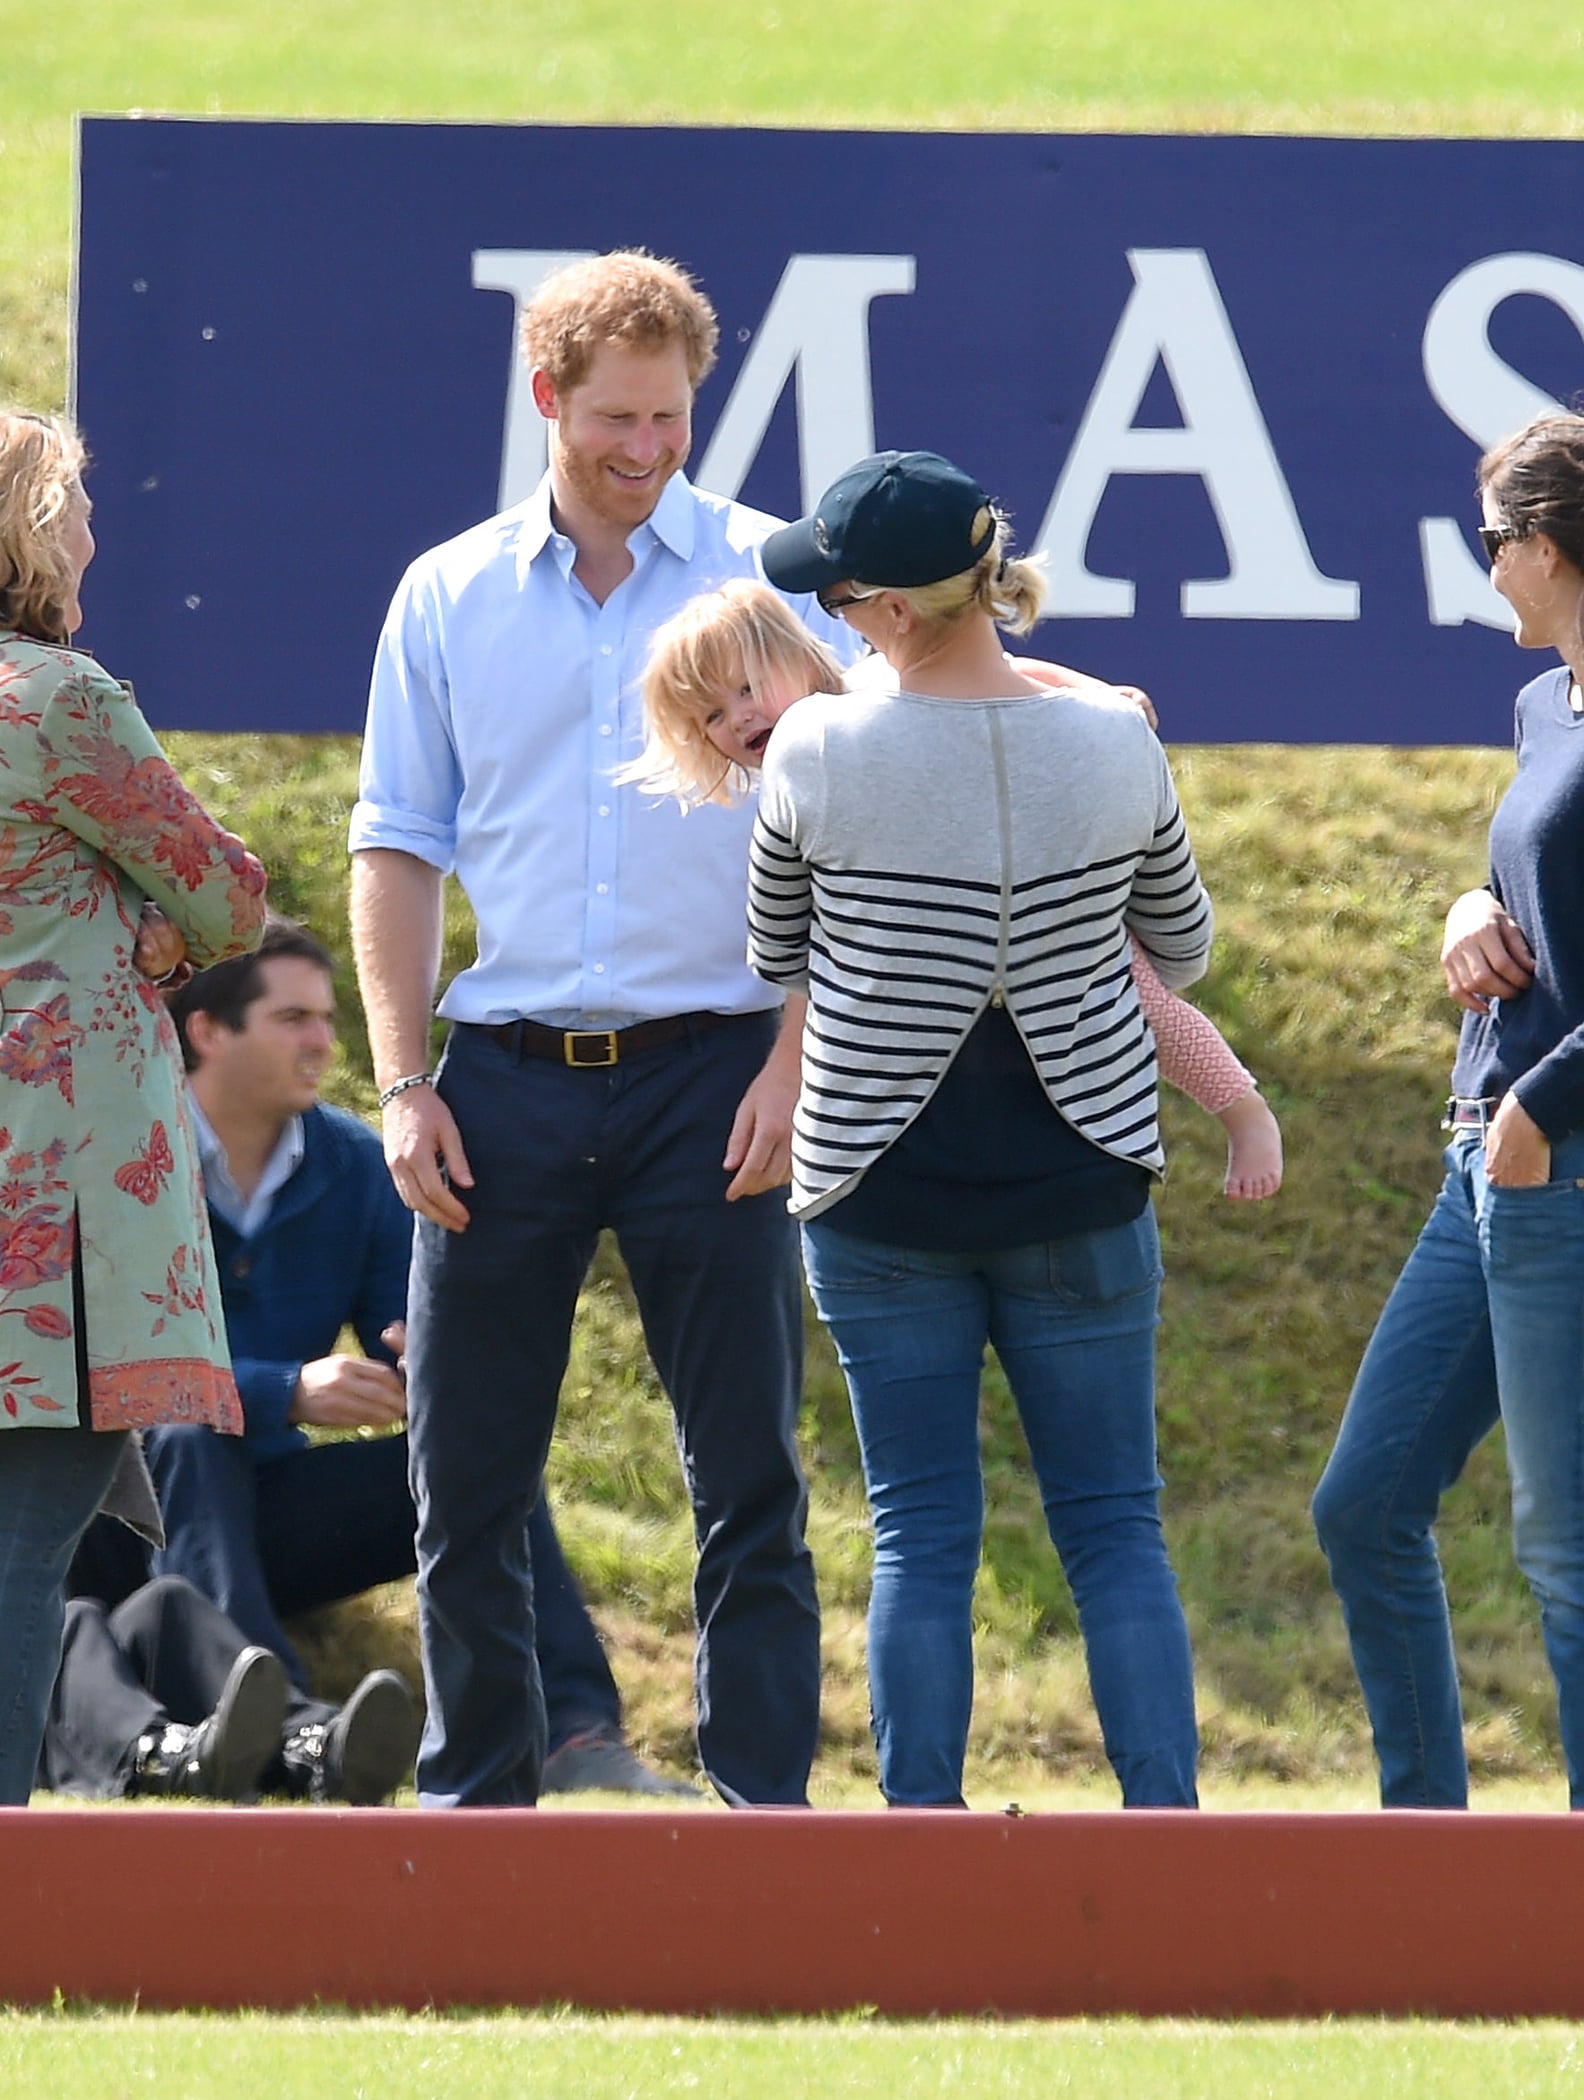 Zara Phillips and Mike Tindall Family Pictures | POPSUGAR Celebrity